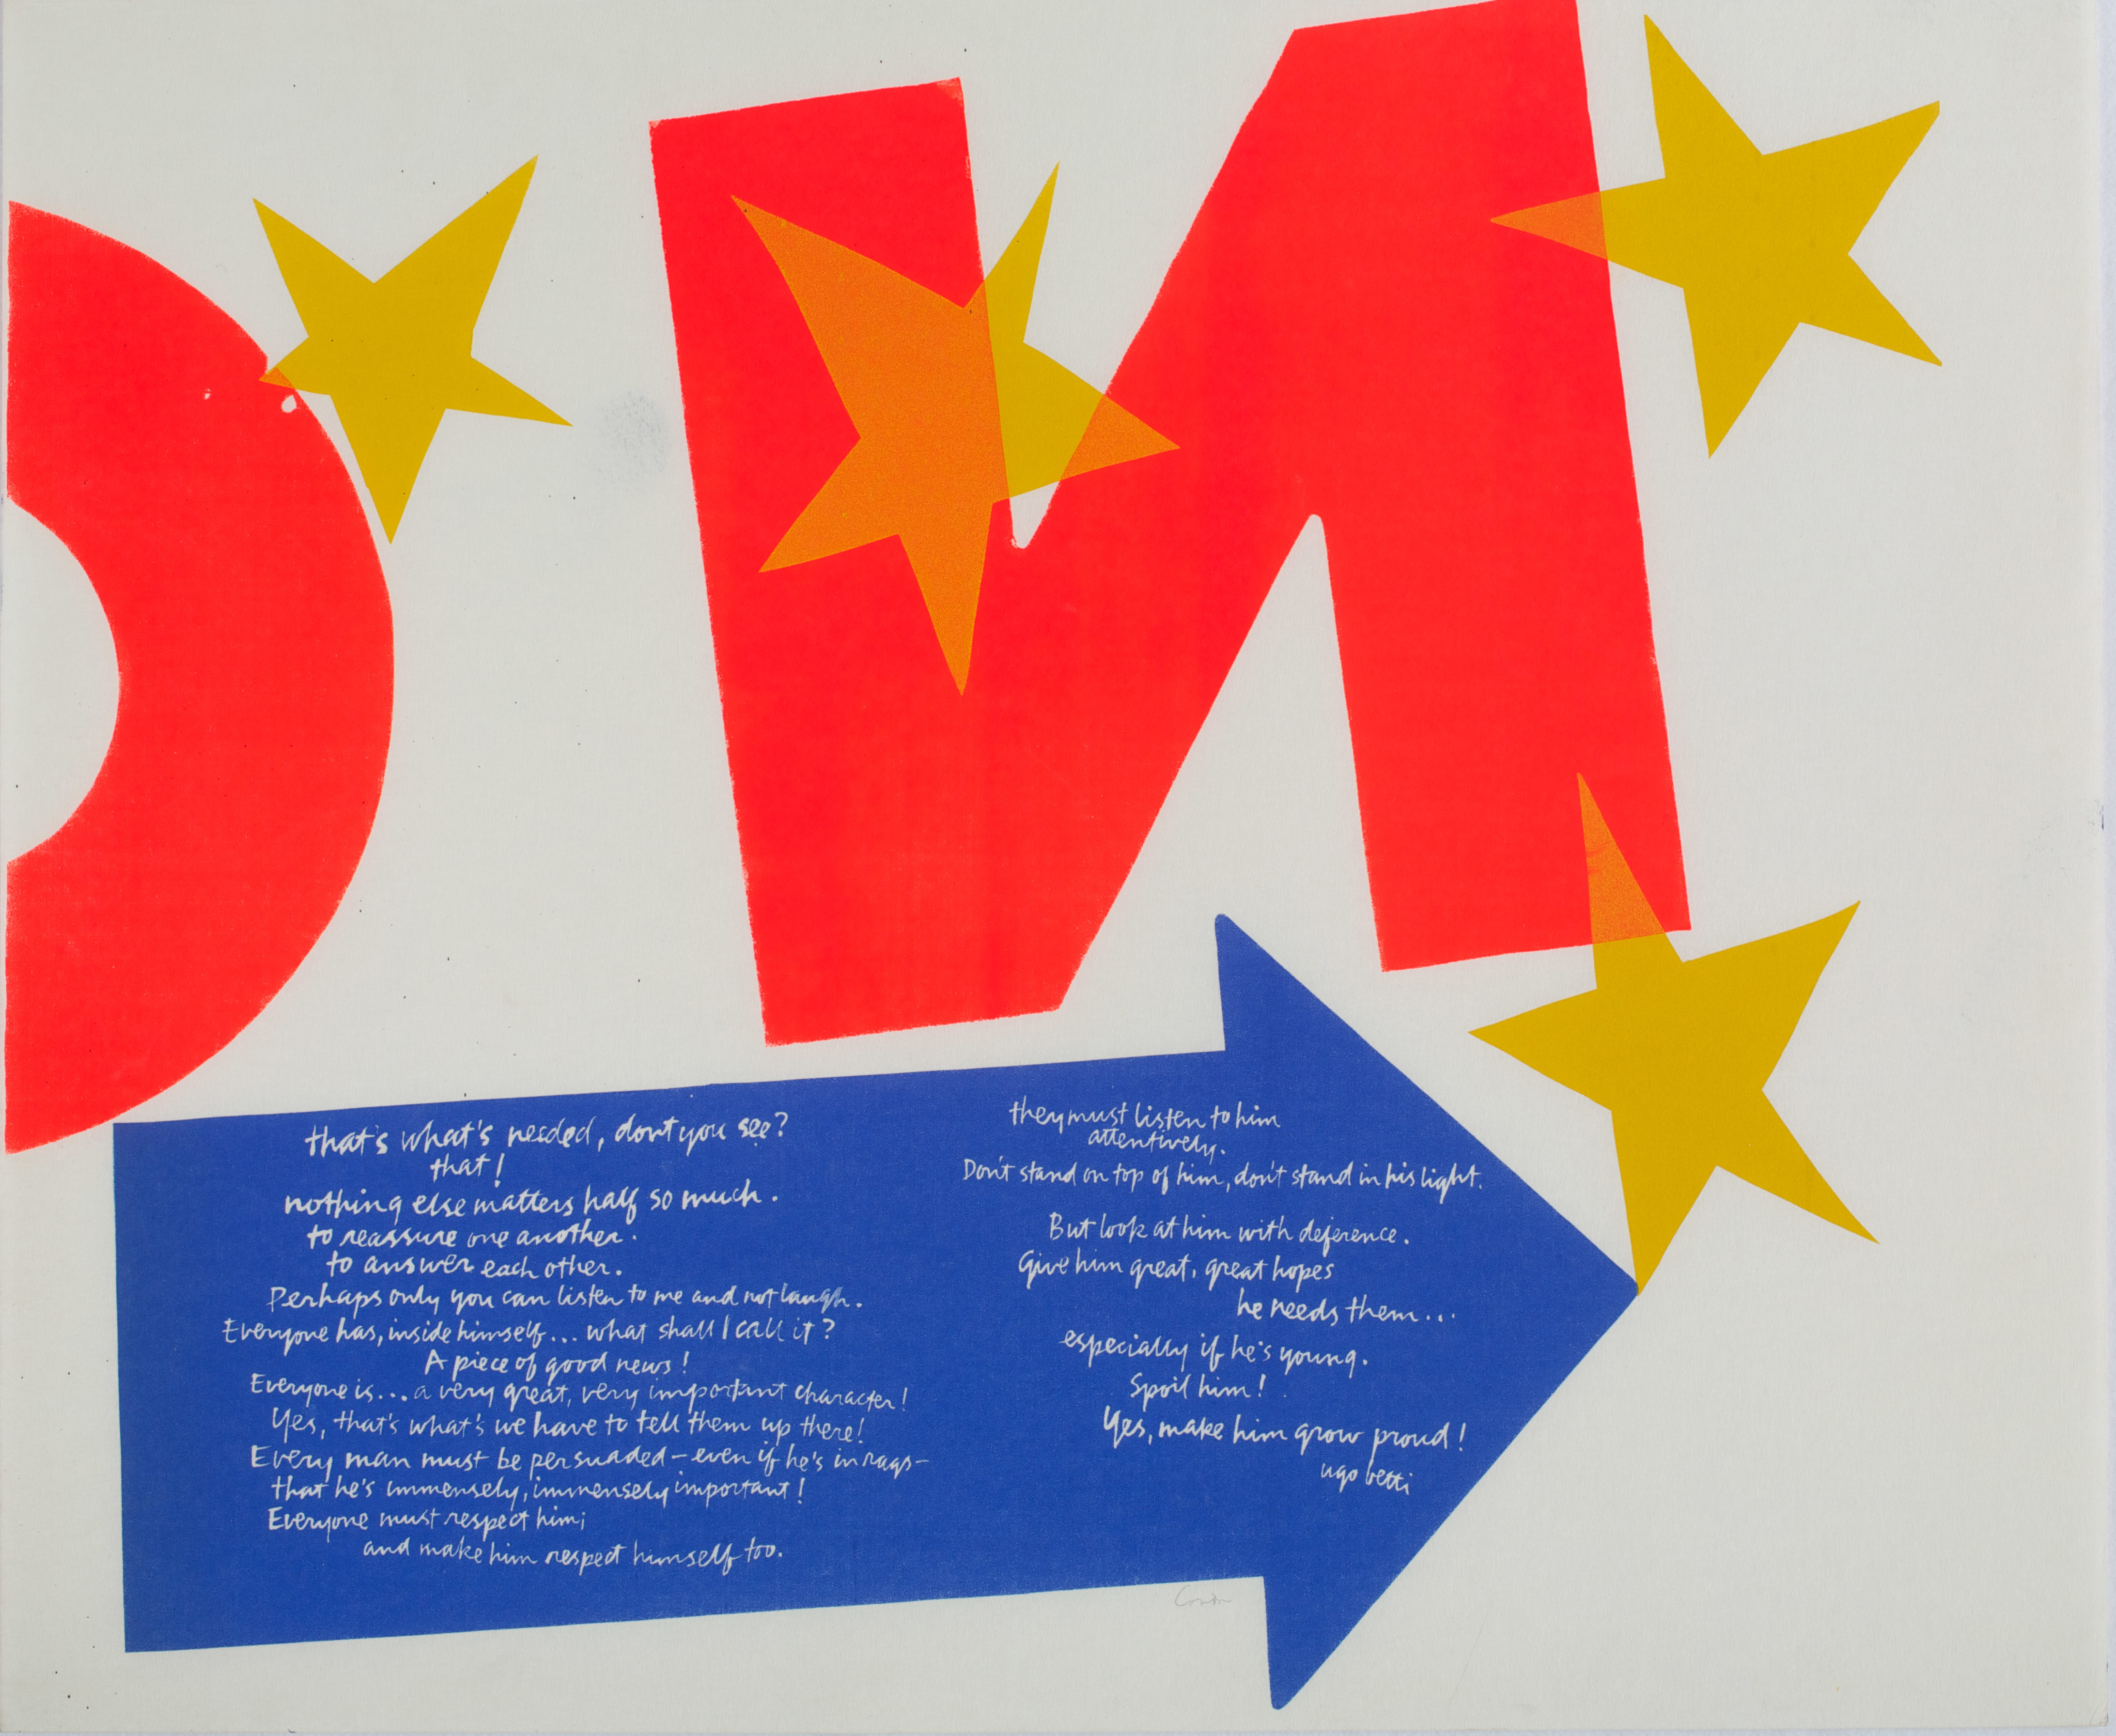 Corita Kent, <i> Stars</i>, 1967 Color silkscreen, 29 3/8 x 29 3/4 in. New Britain Museum of American Art, Gift of John Fitzgerald, 1968.01 © 2019 Estate of Corita Kent/ Immaculate Heart Community/ Licensed by Artists Rights Society (ARS), New York